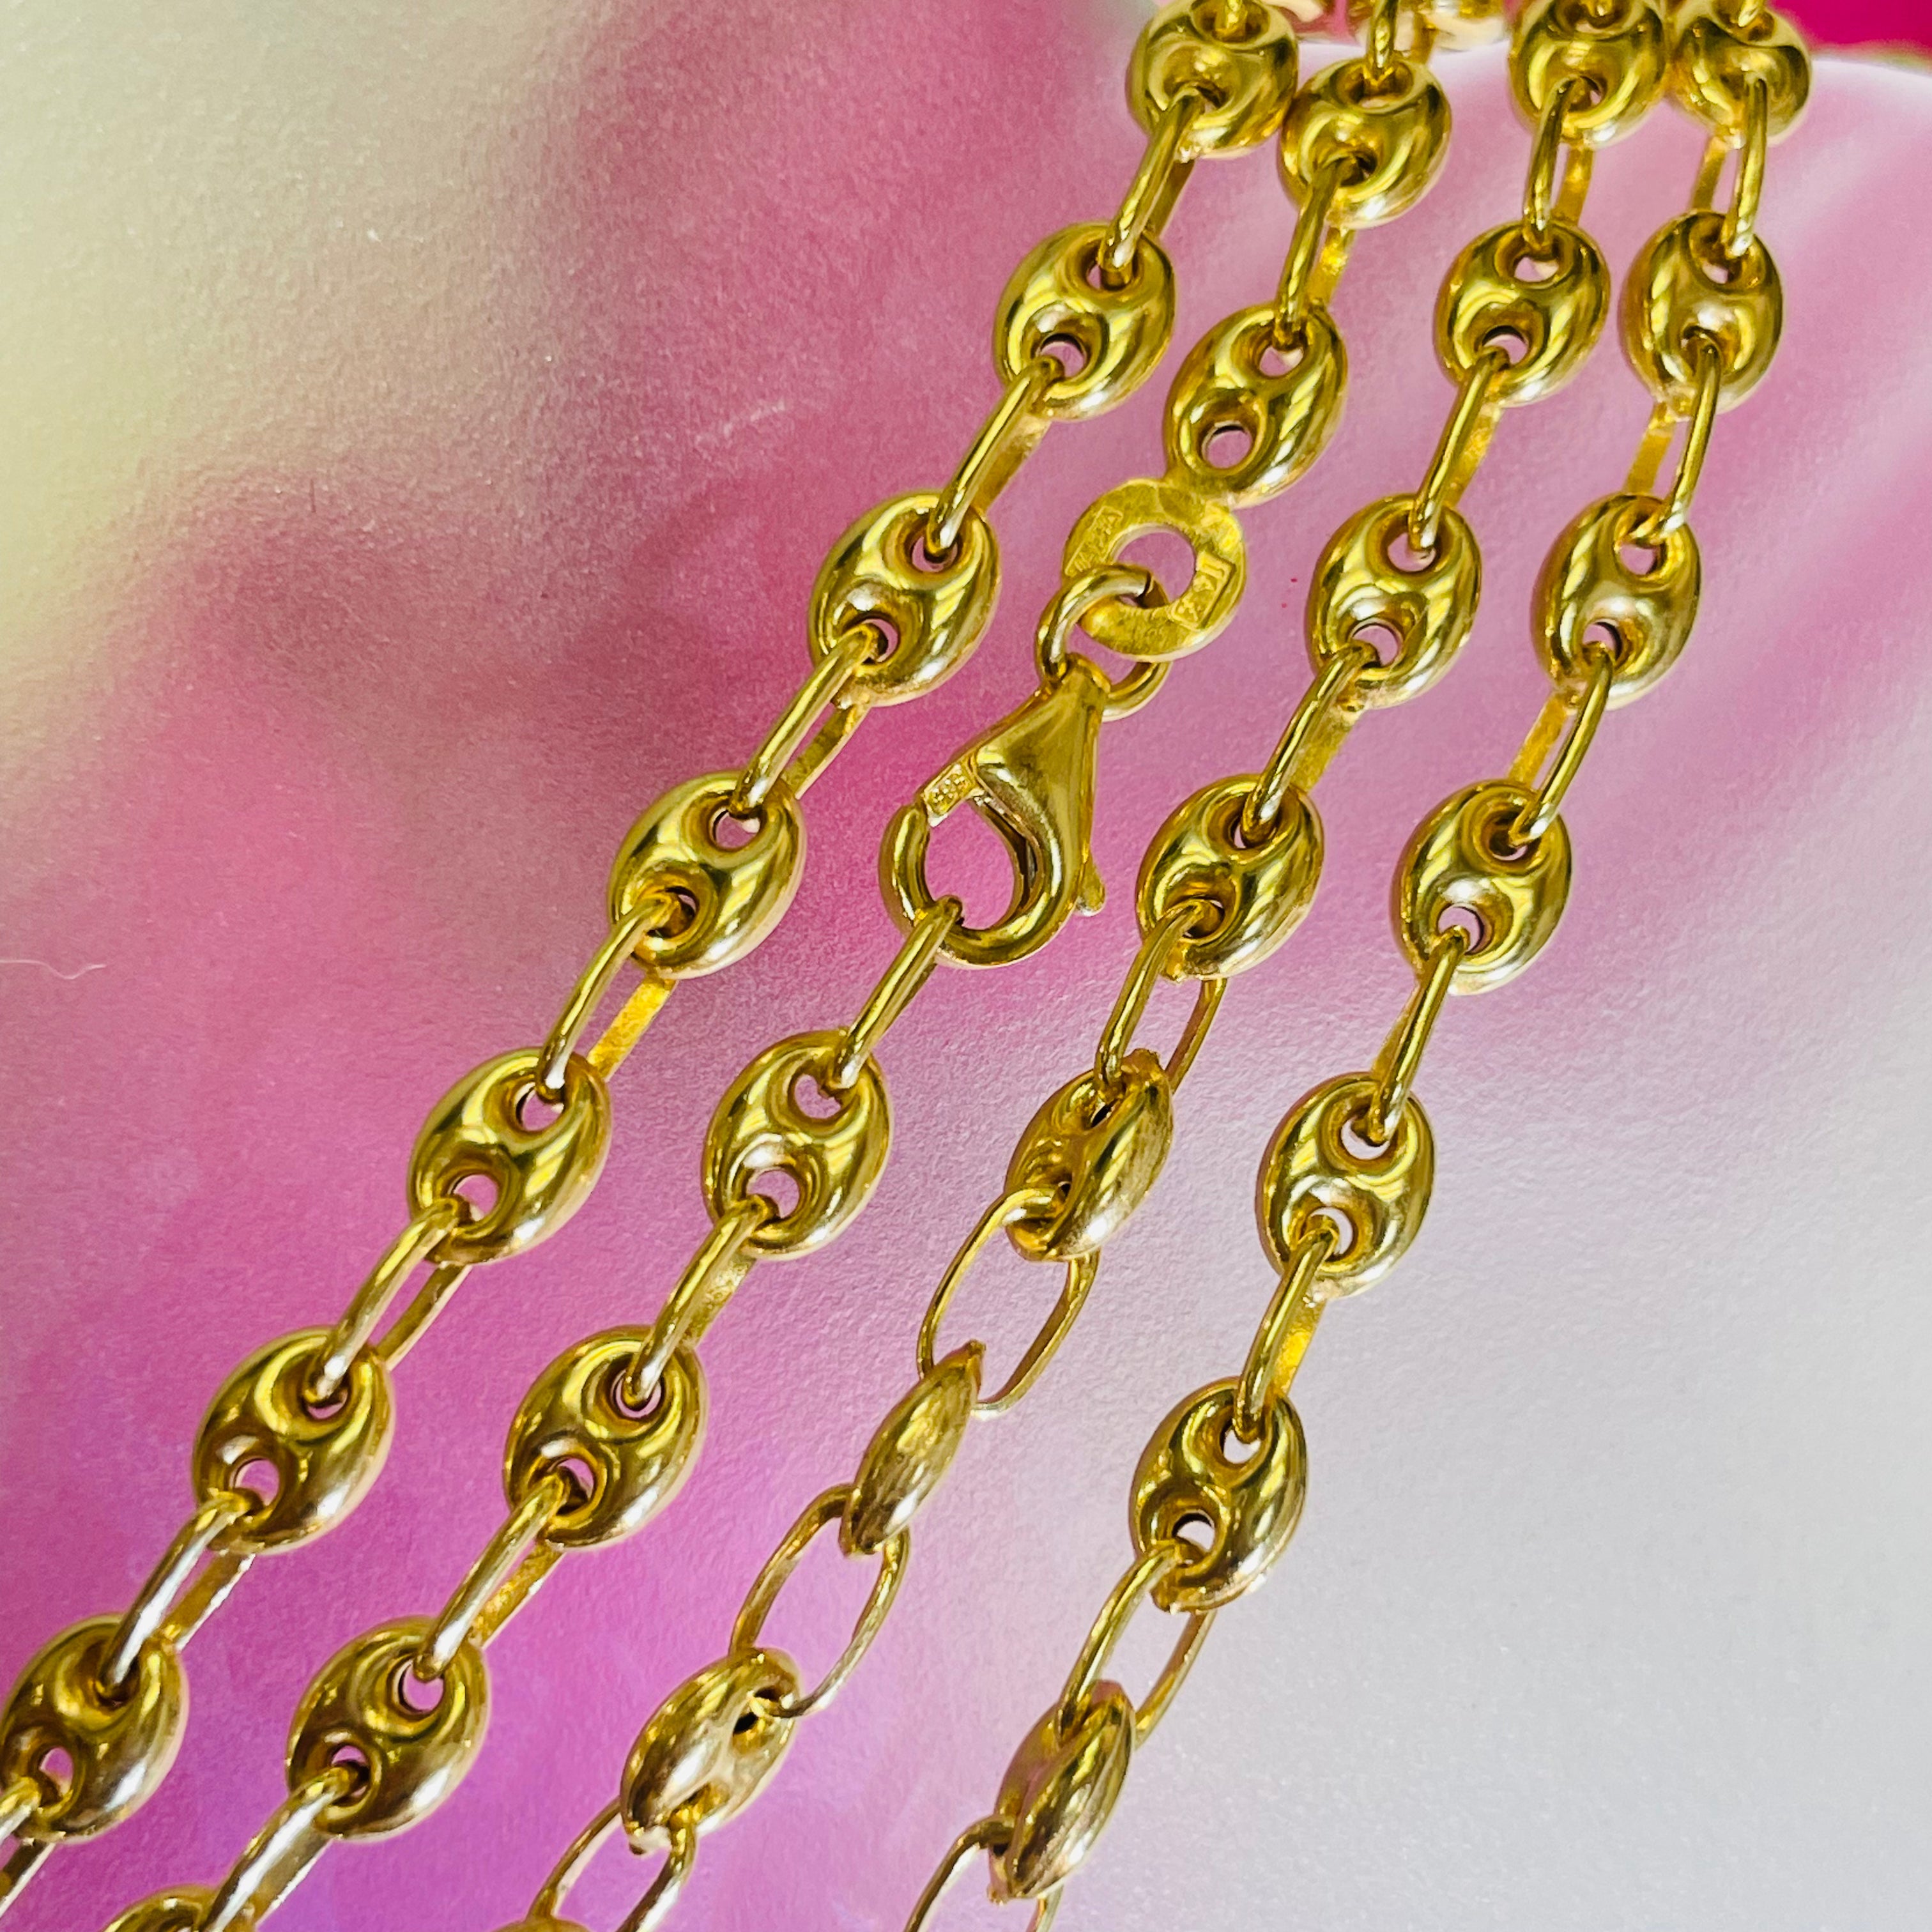 4mm Gucci Link Puff Link 14K Yellow Gold Necklace Chain